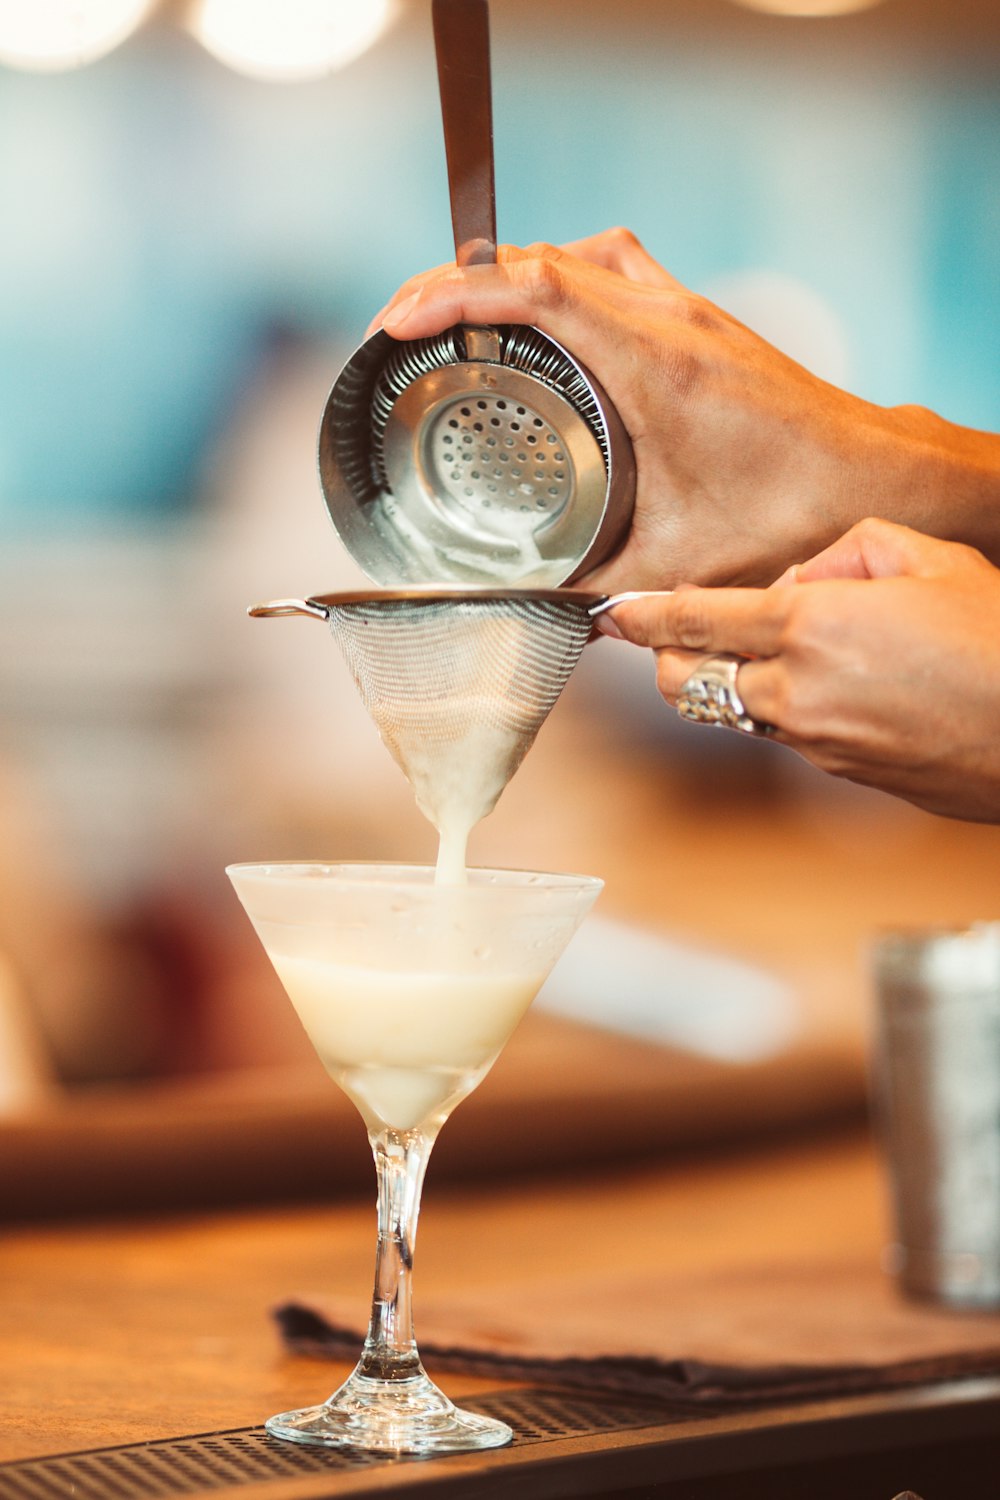 person holding container pouring white liquid on martini glass